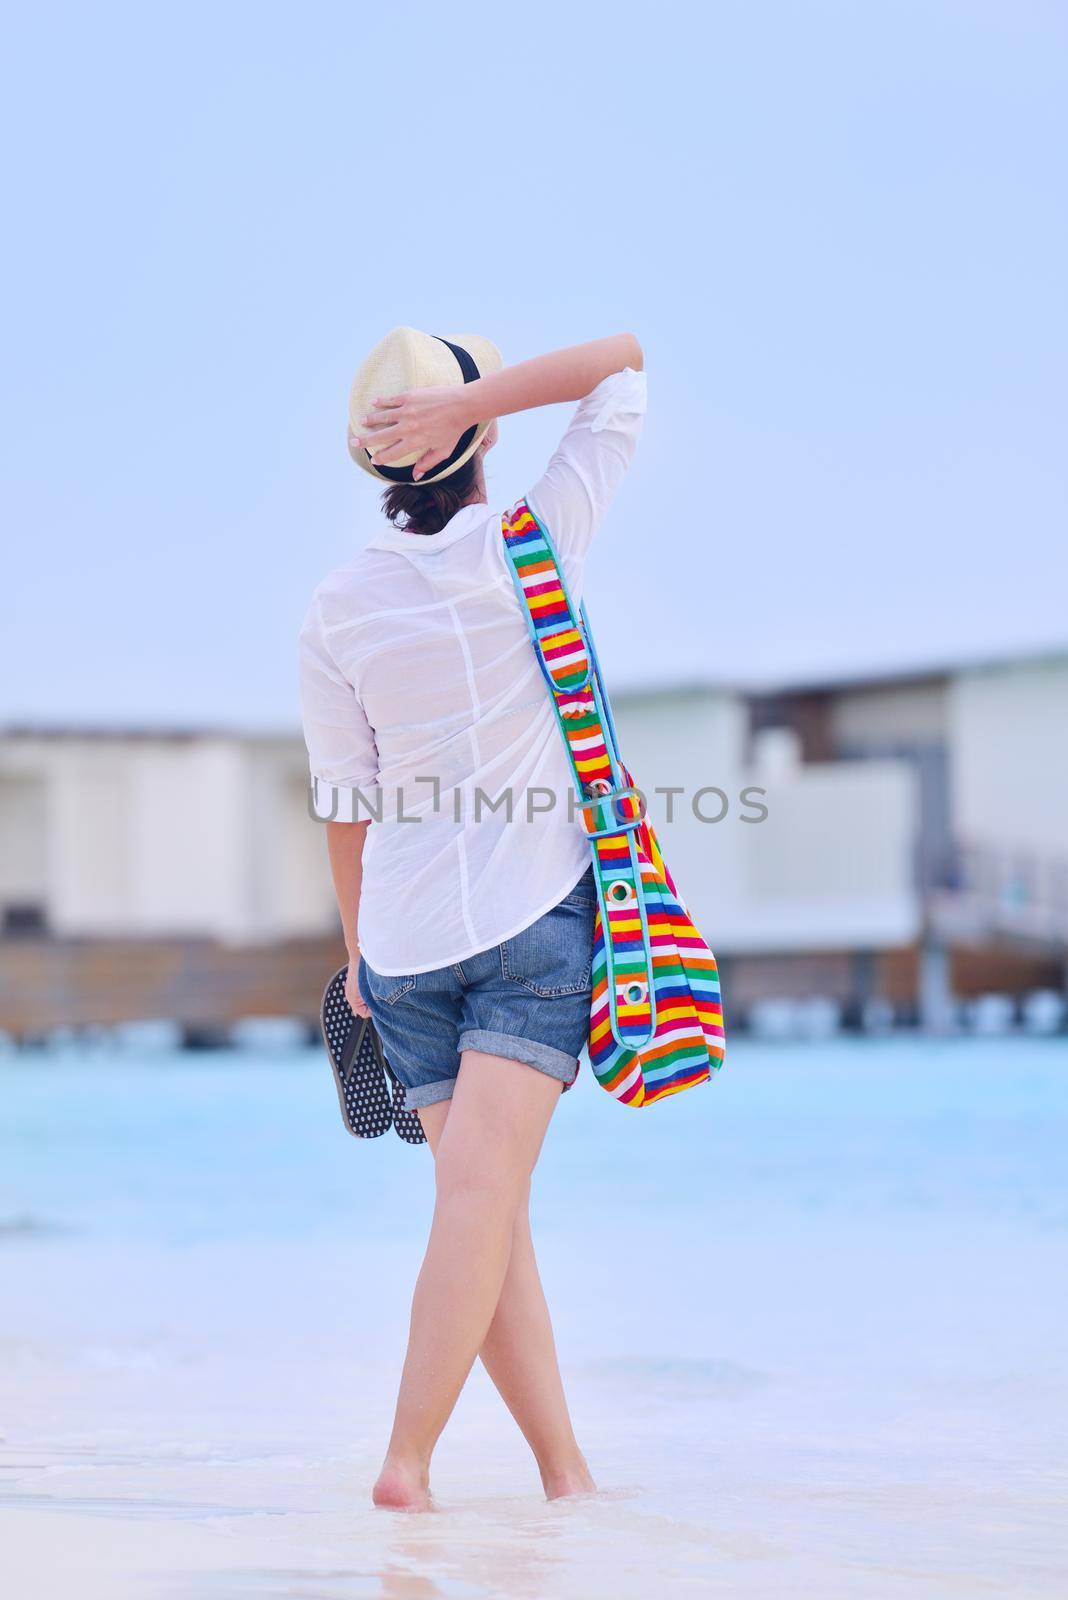 beautiful and happy woman girl on beach have fun and relax on summer vacation  over the sea